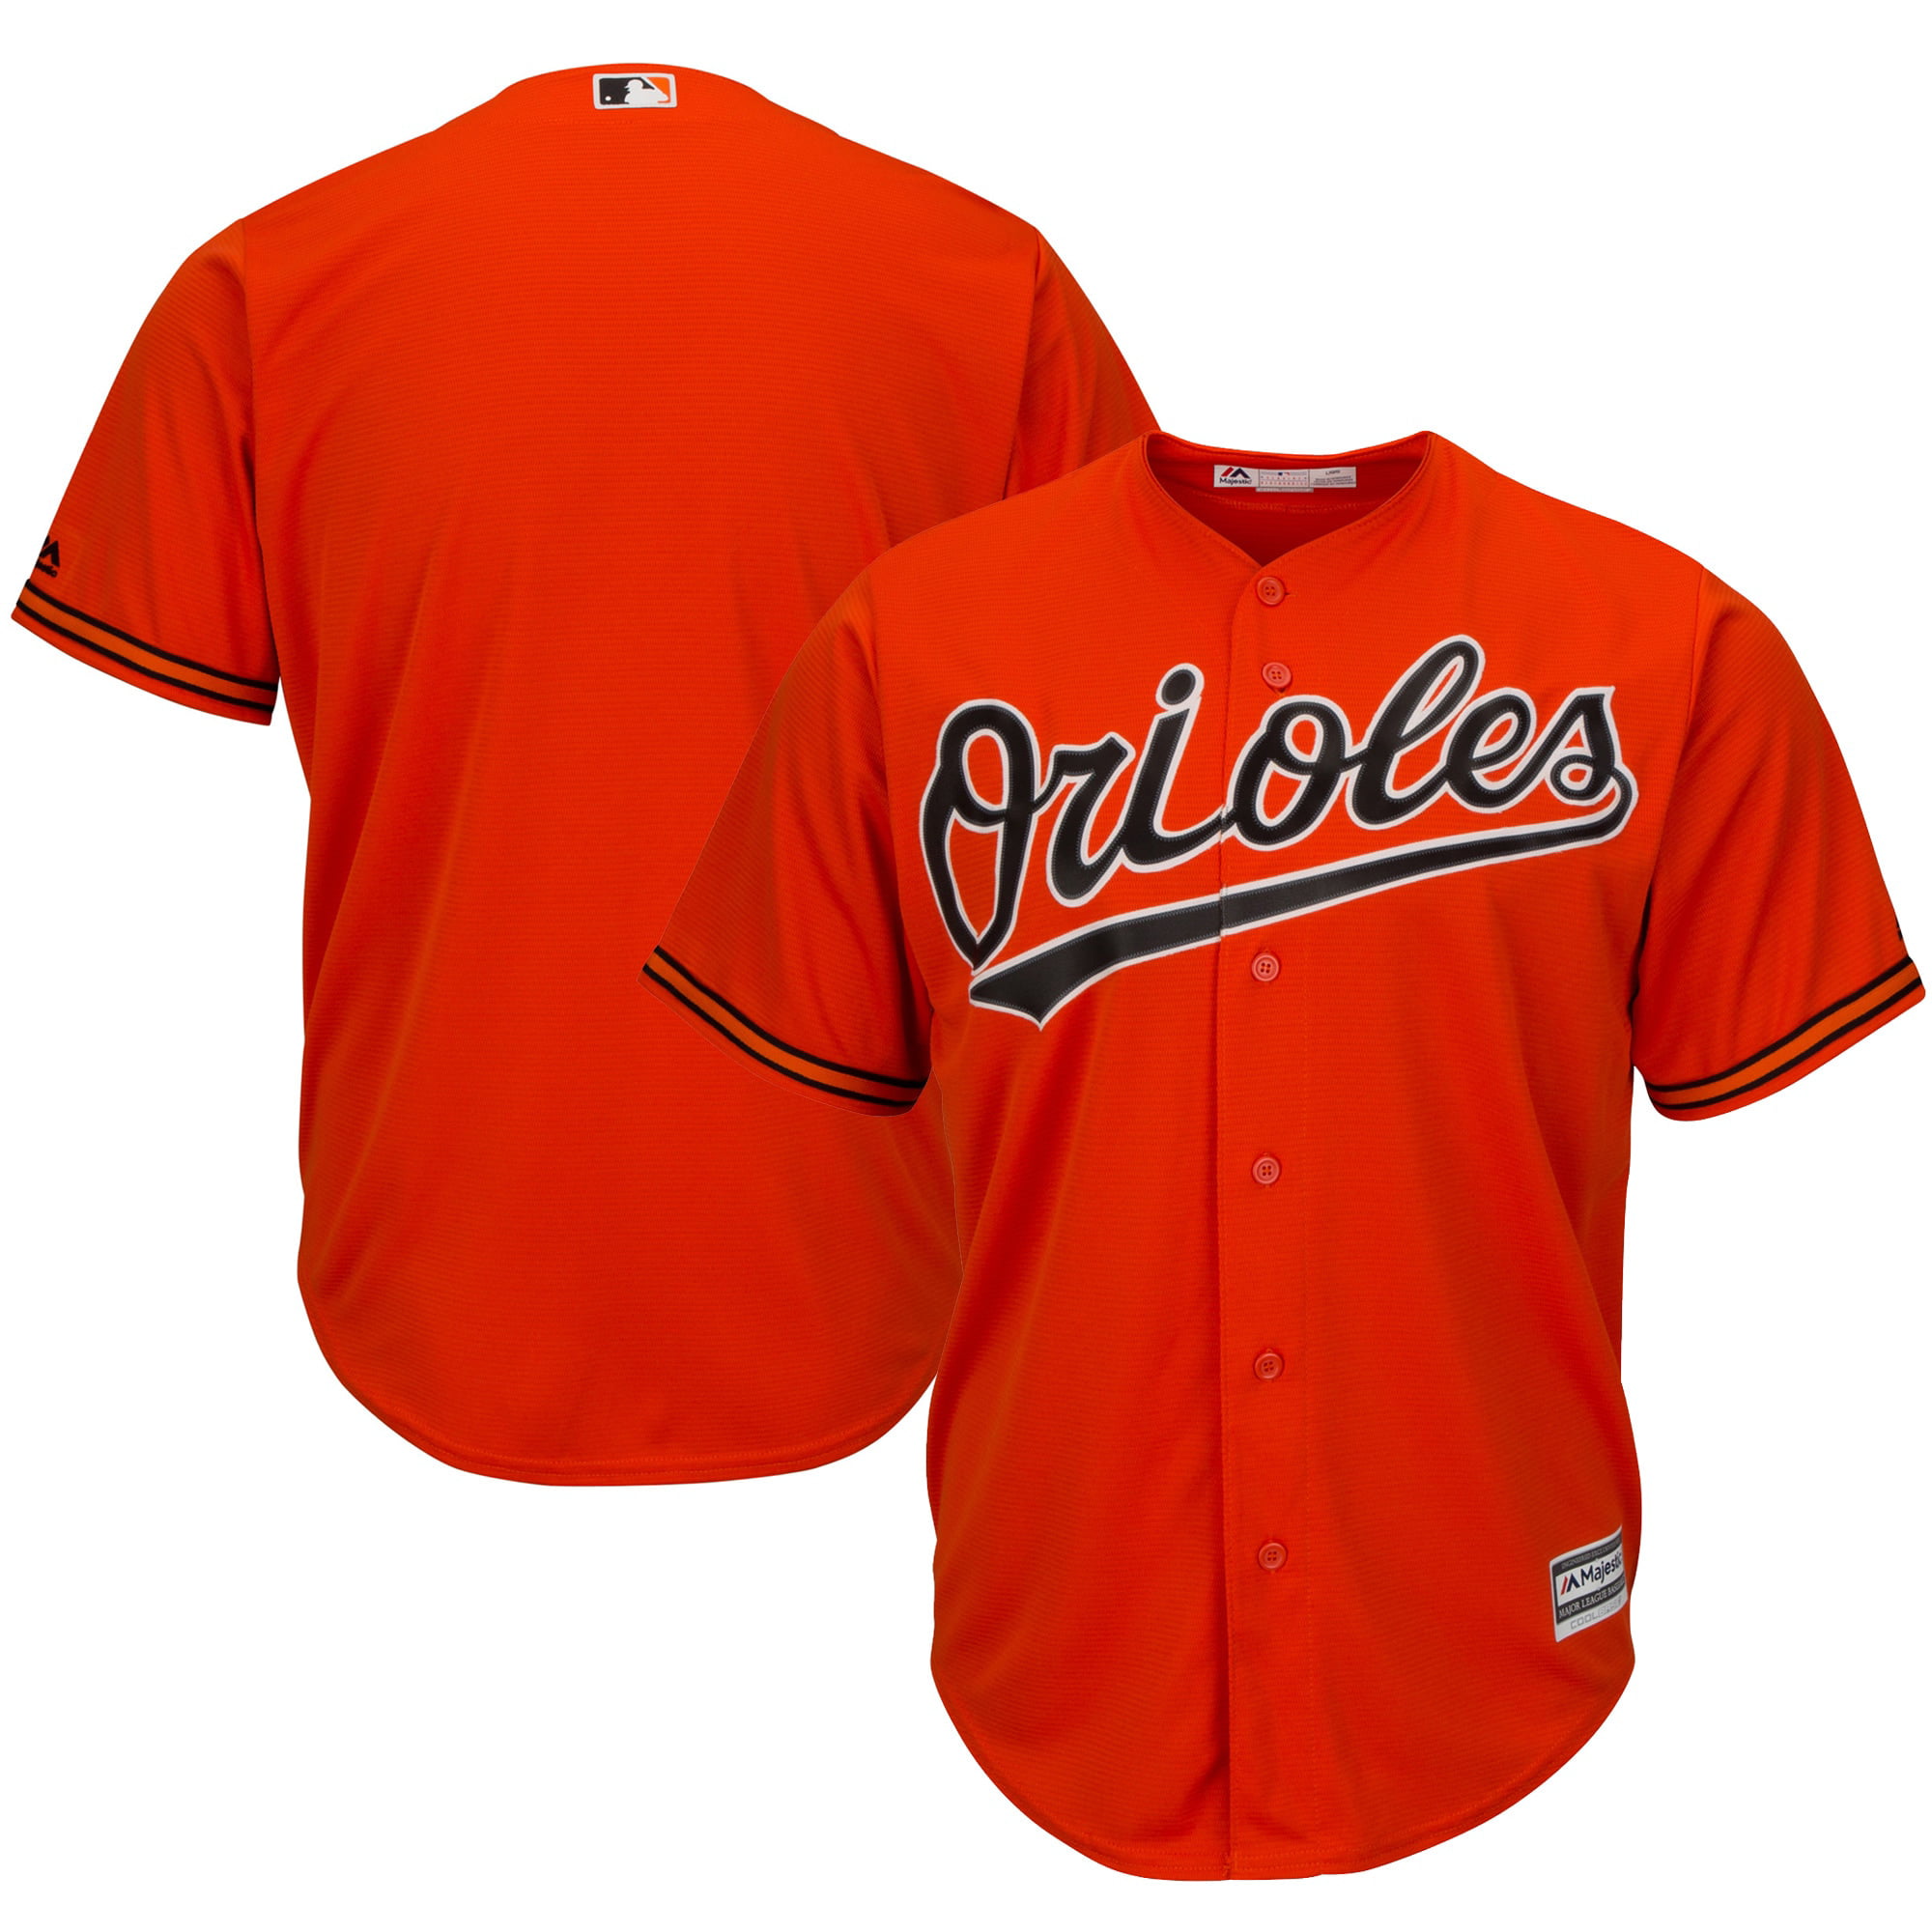 Baltimore Orioles Majestic []Official<img src=